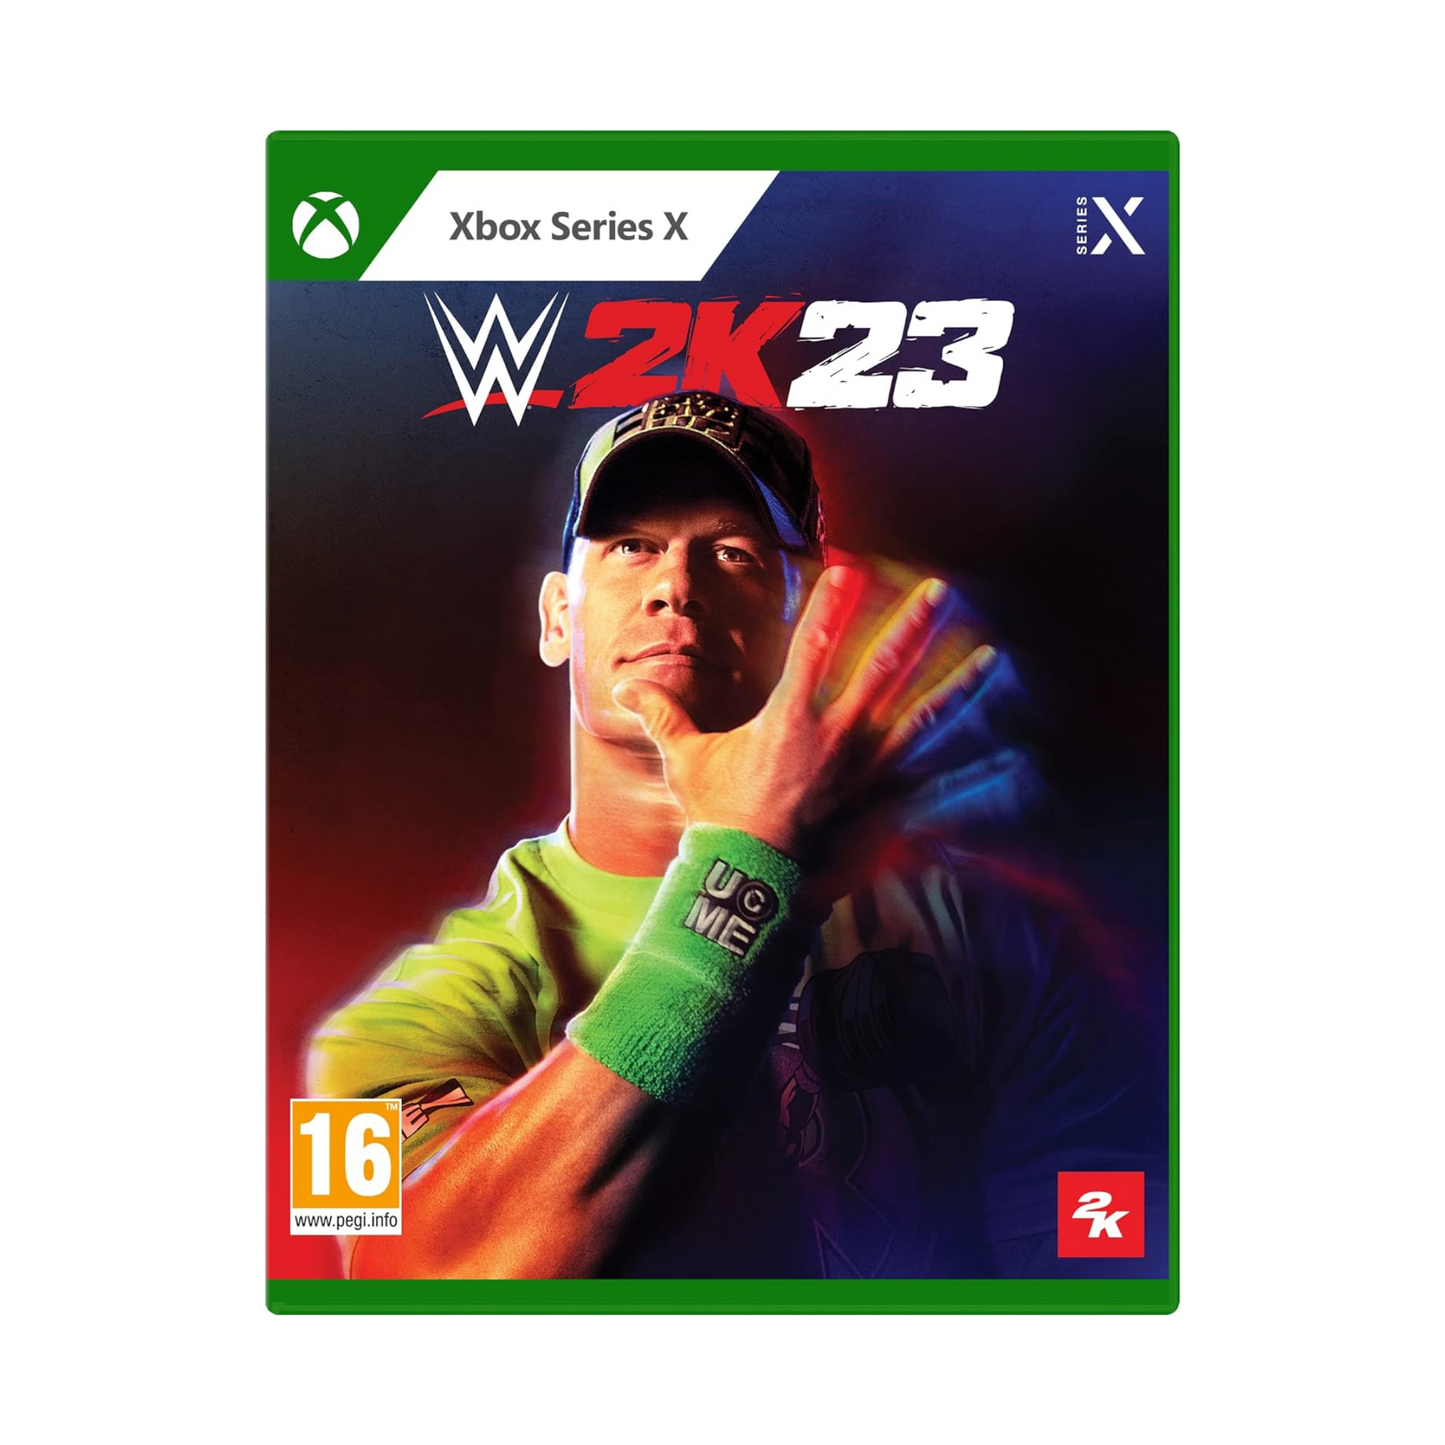 WWE 2K23 Video Game for Xbox series X